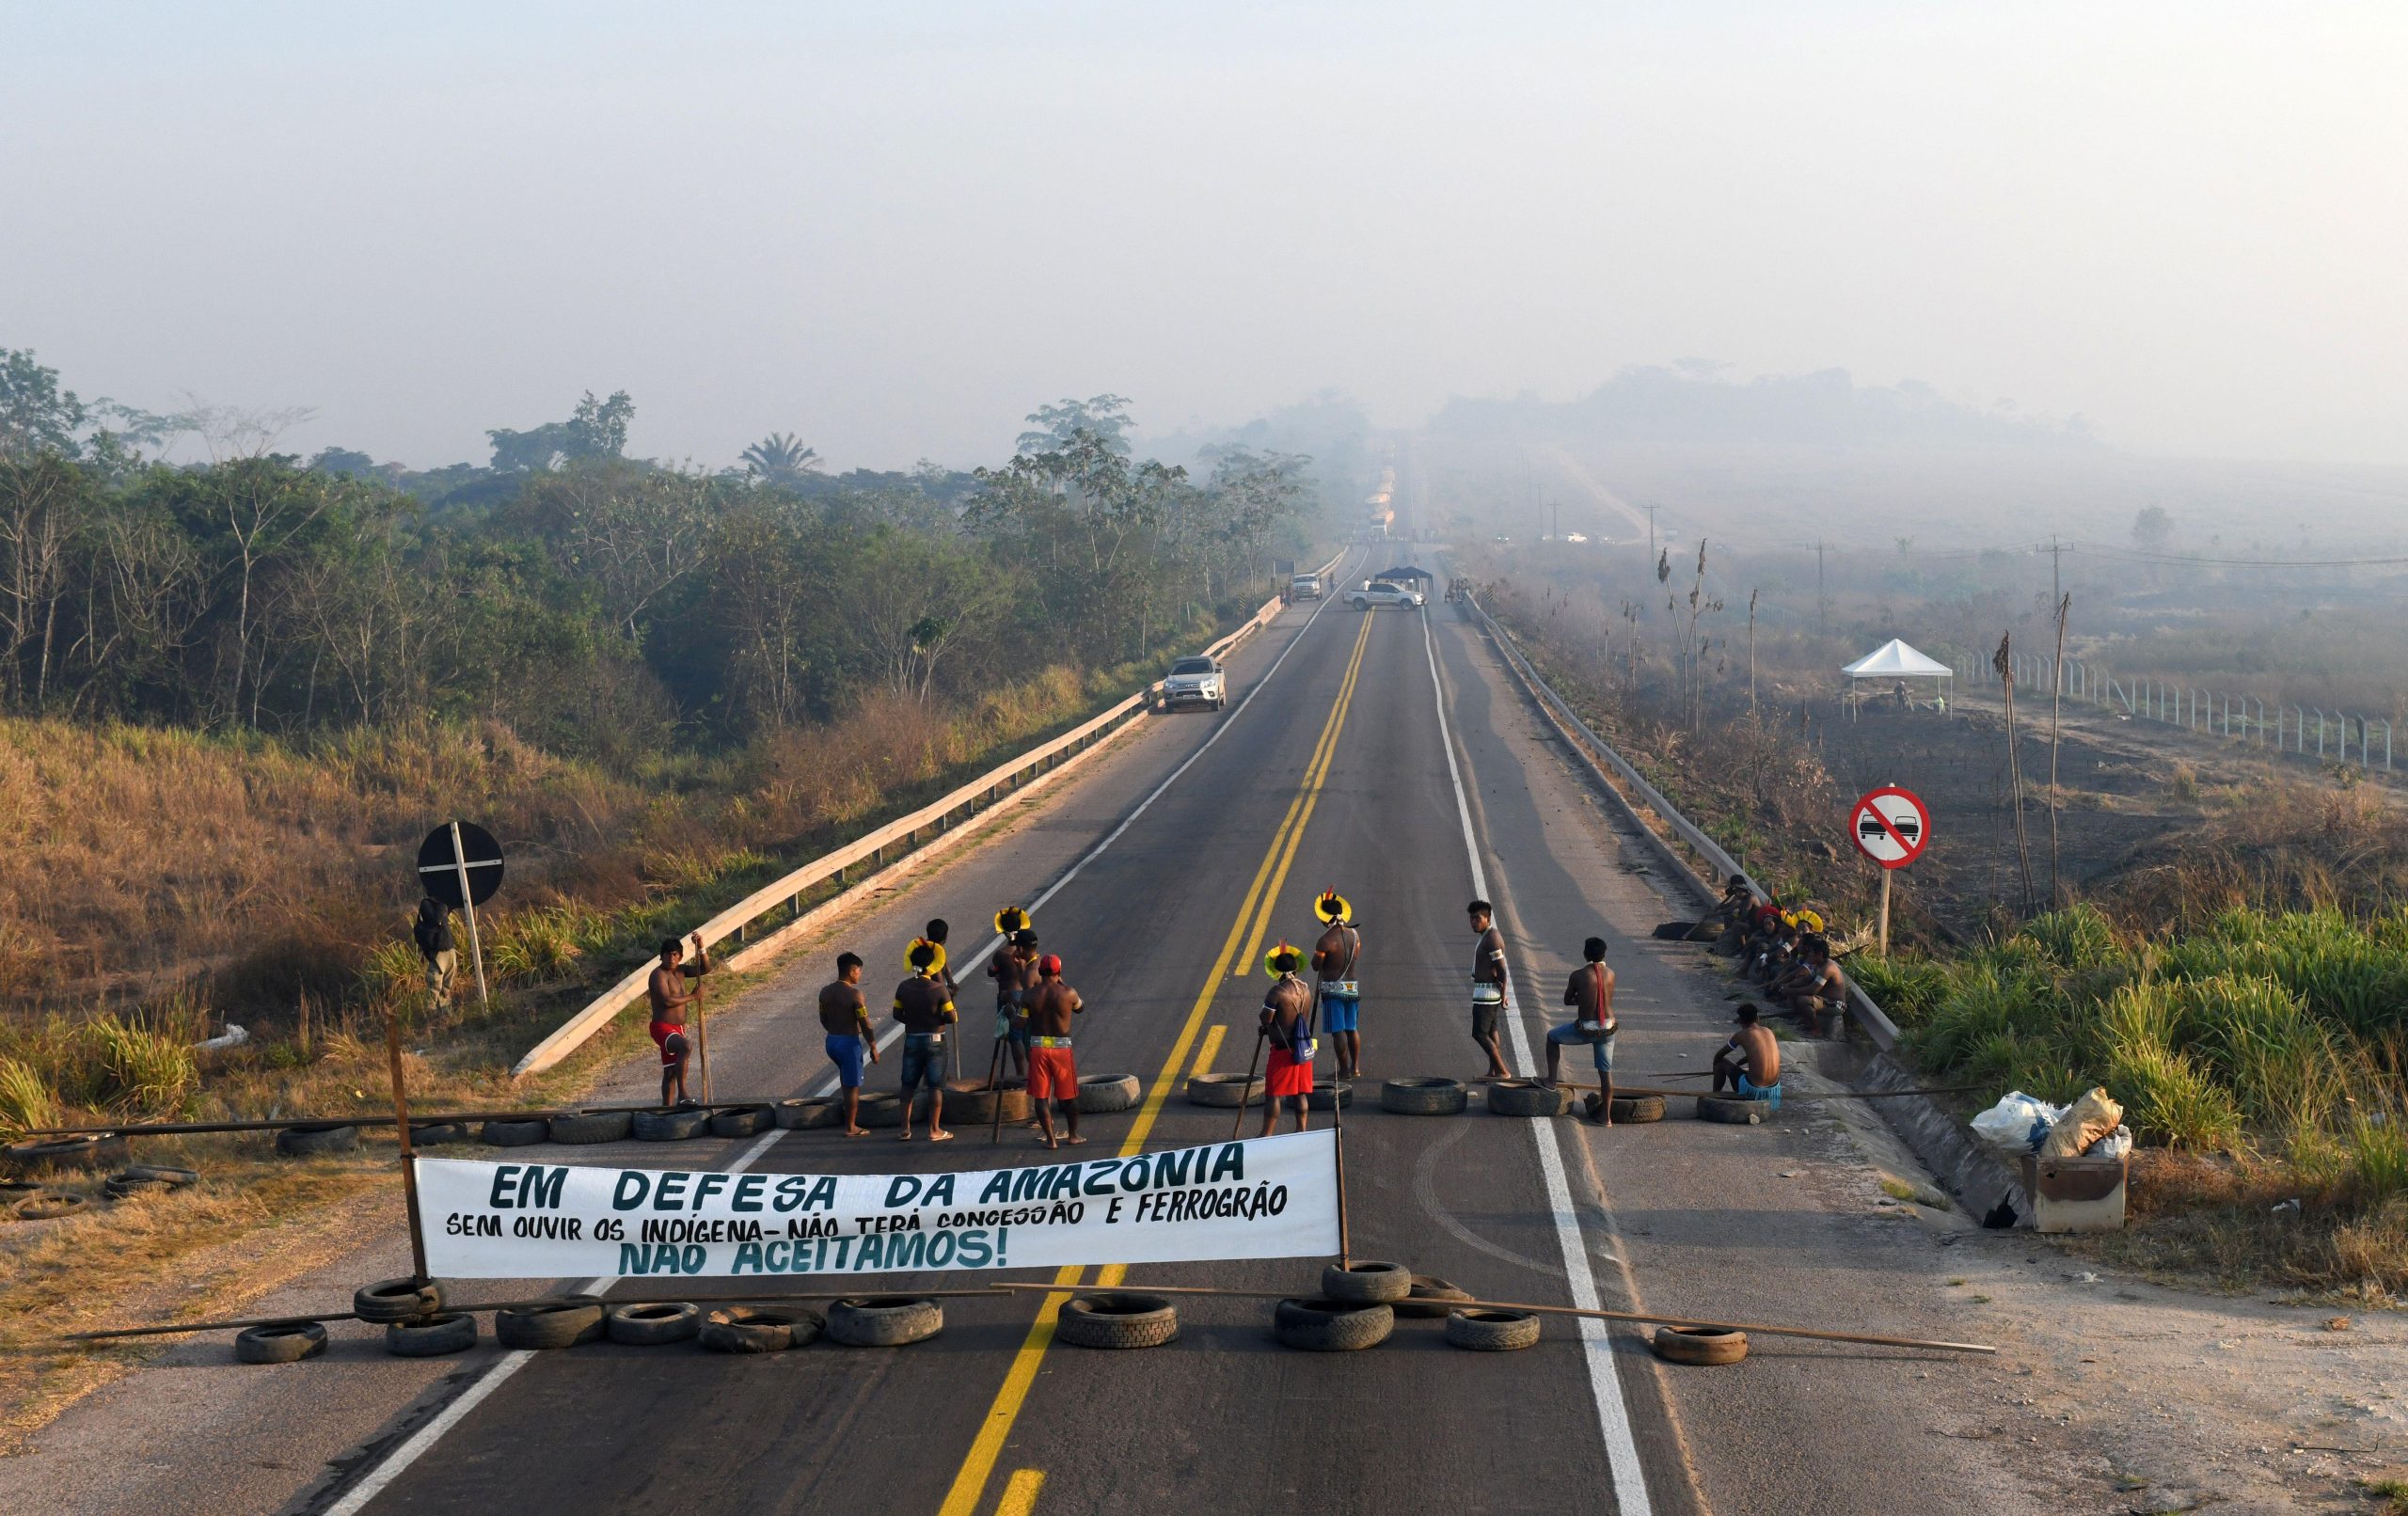 protest in defence of the Amazon on a highway